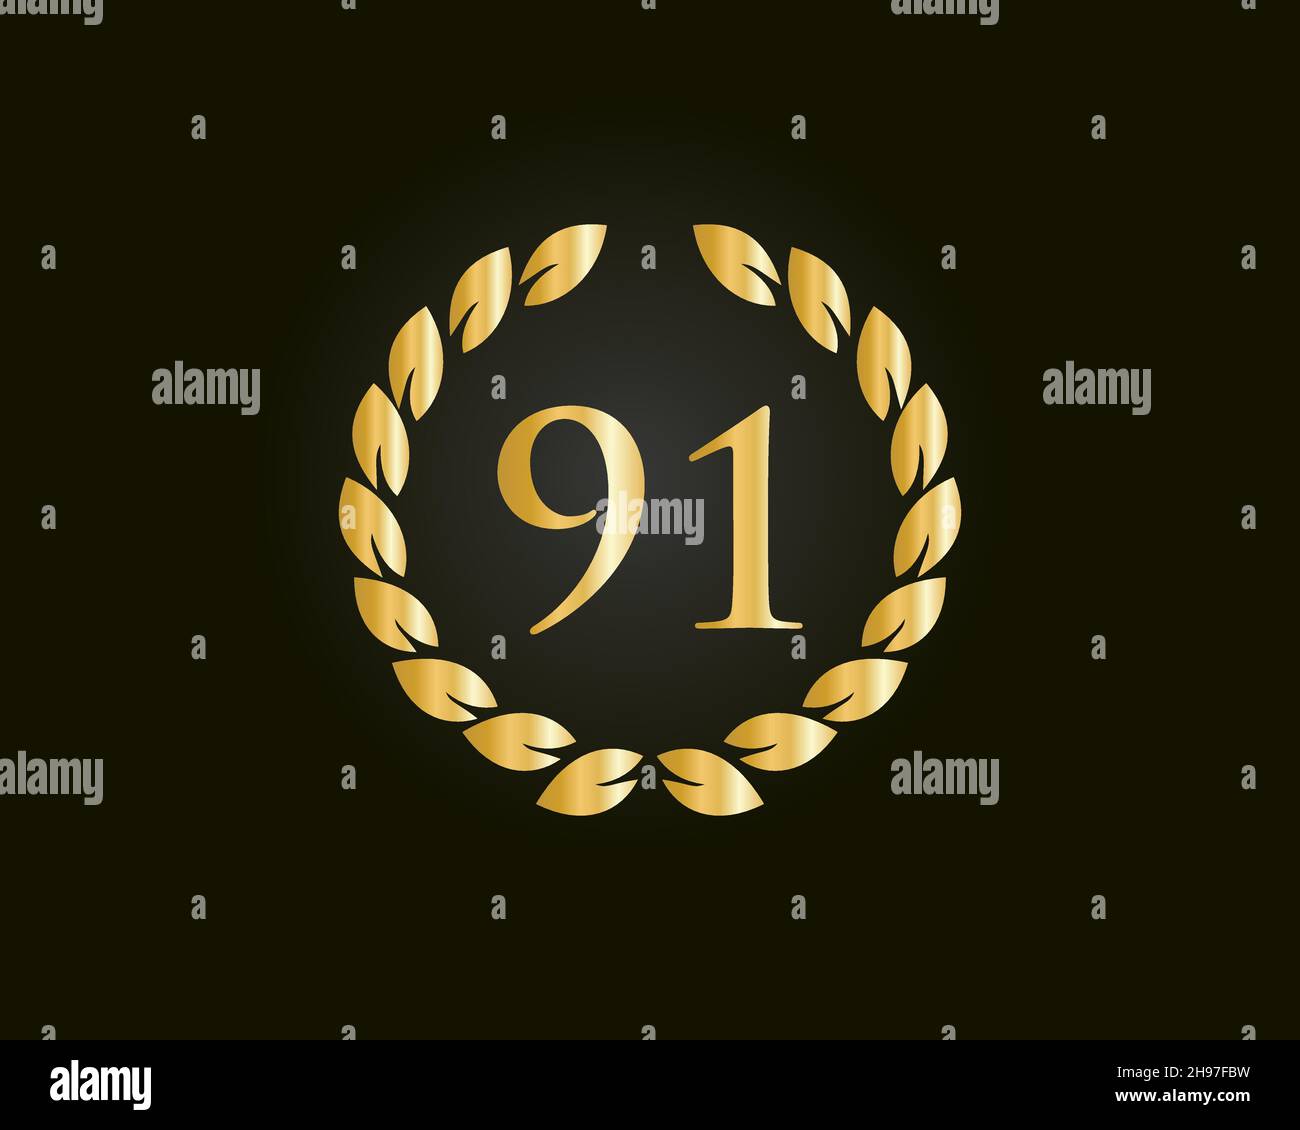 91 Years Anniversary Ring Logo Template. 91 Years Anniversary Logo With Golden Ring Isolated On Black Background, For Birthday, Anniversary Stock Vector